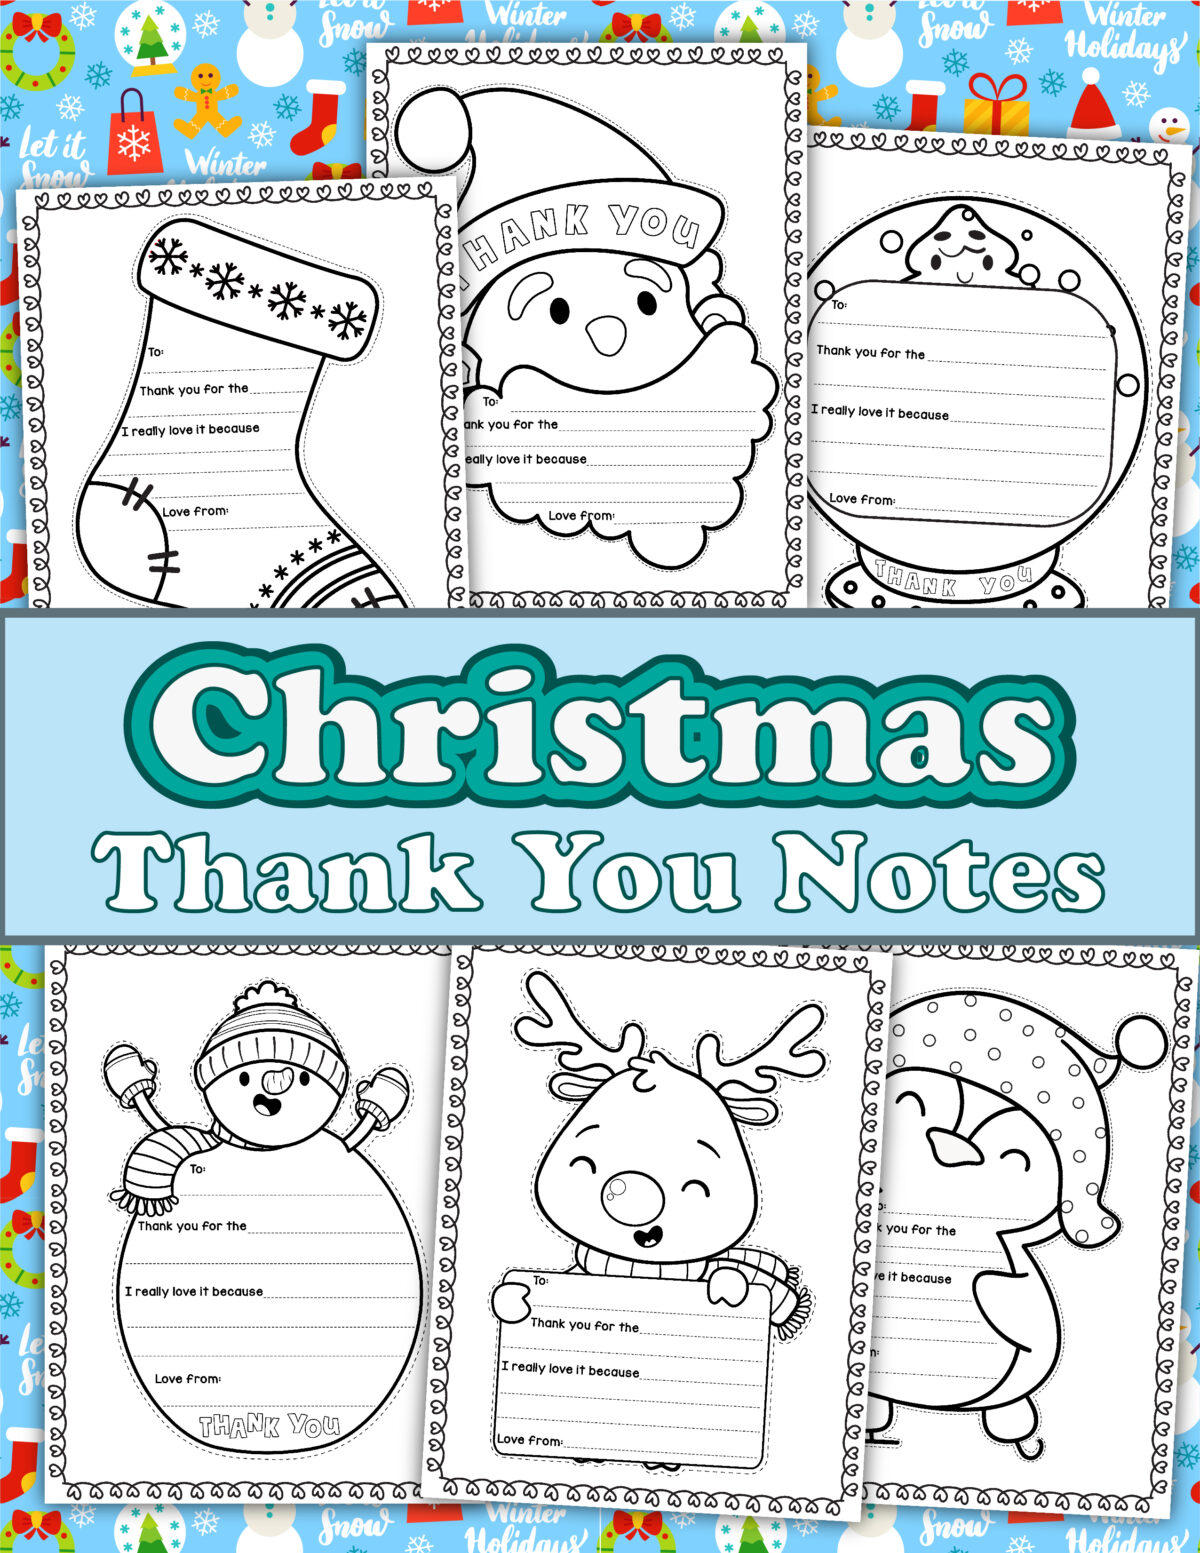 Print these free printable Christmas thank you notes that your kids can colour in to send heartfelt Thank Yous to friends and family.